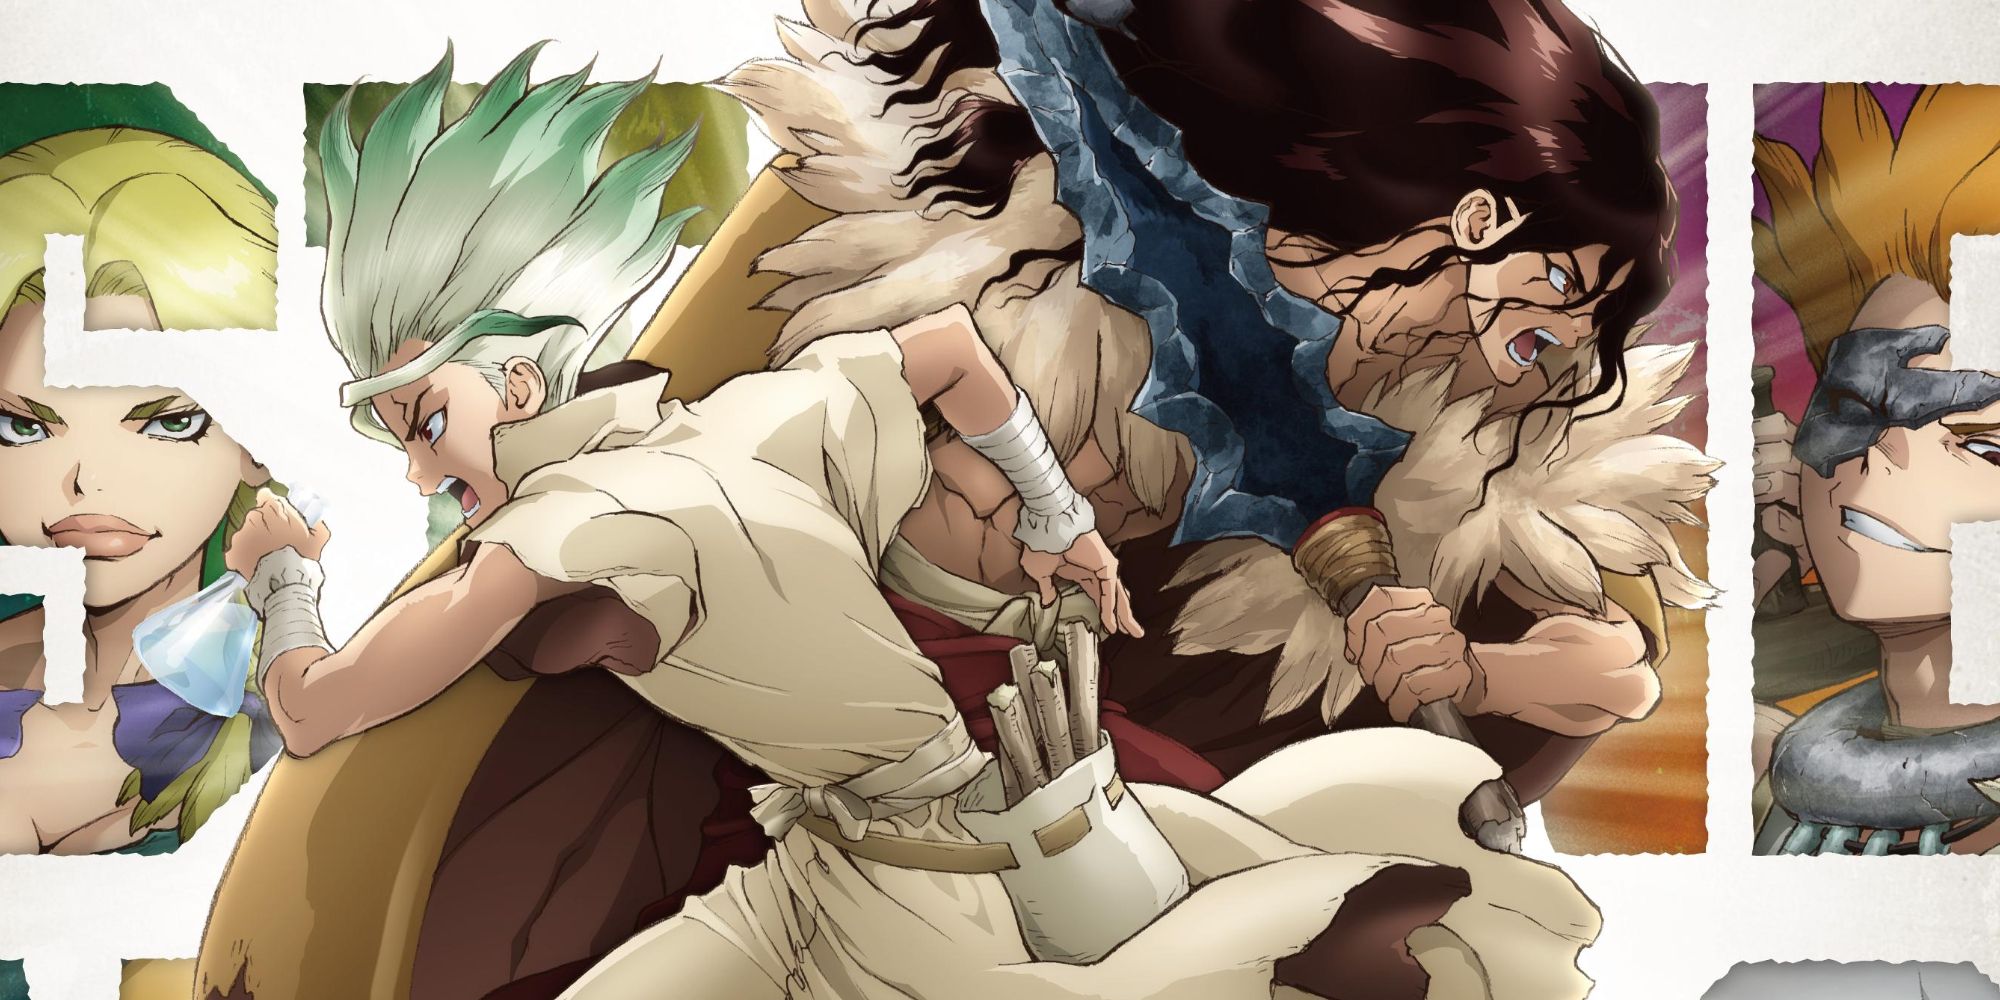 Dr. Stone Season 2 Ep 11 Proluge Of Dr. Stone On Toonami